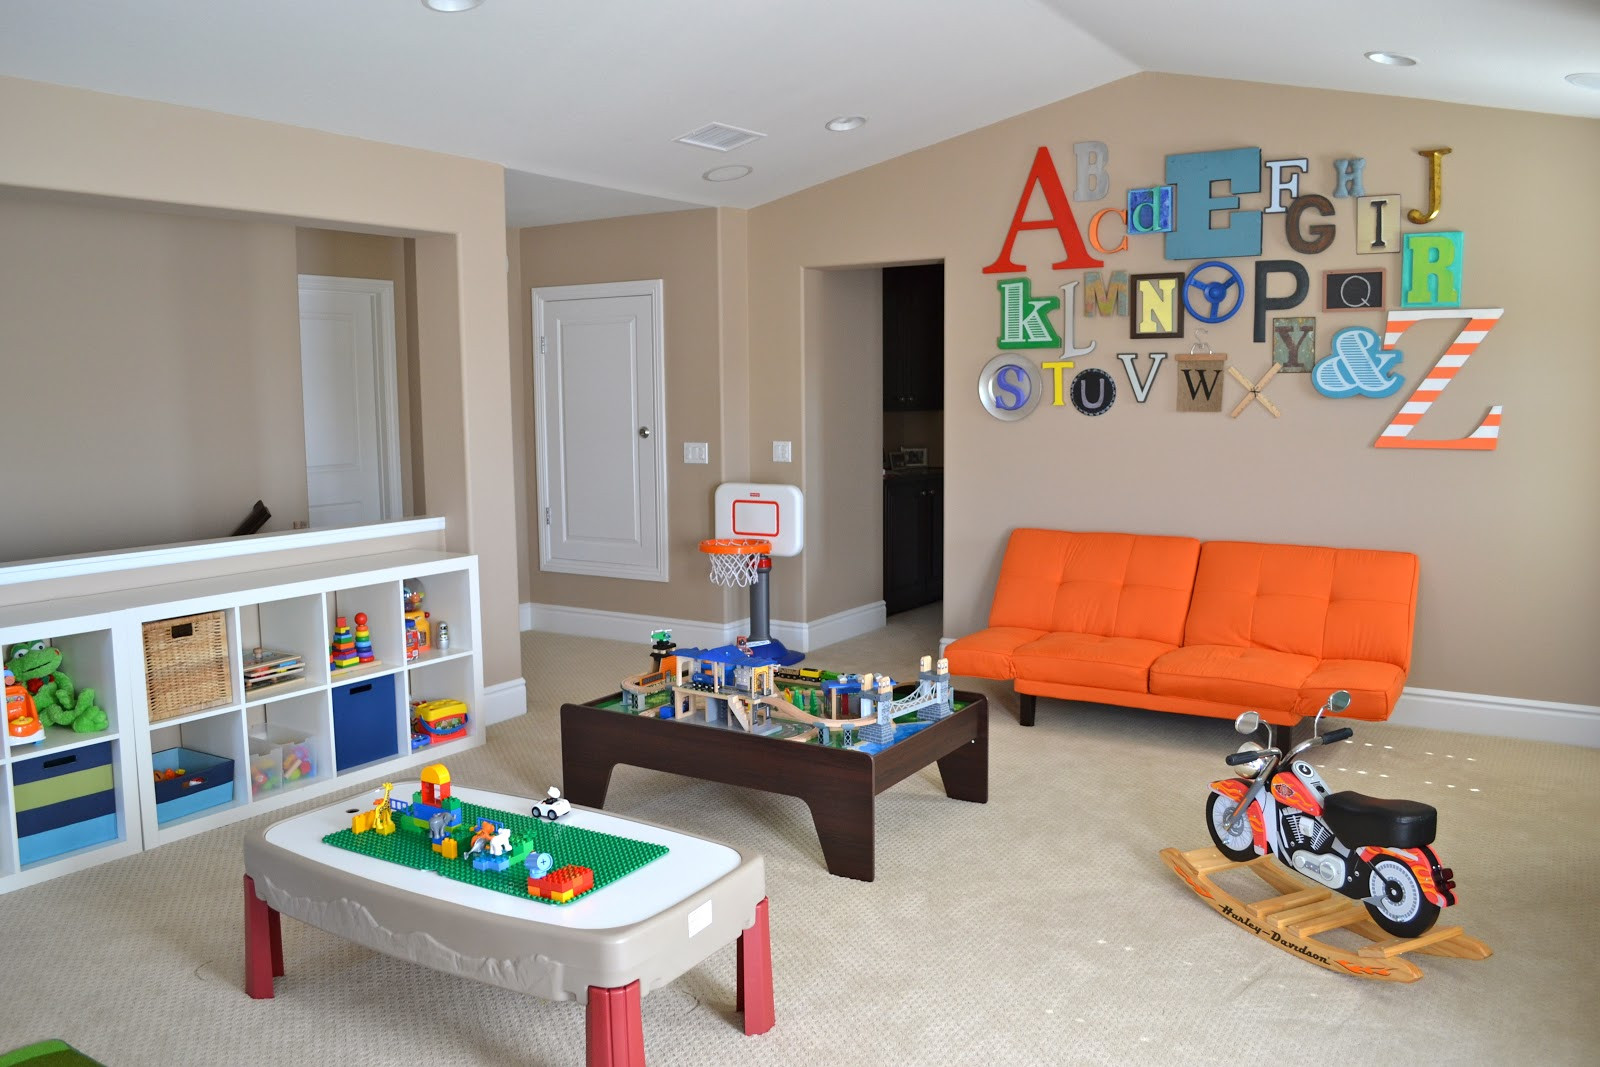 Playroom Ideas For Kids
 Playroom Tour With Lots of DIY Ideas • Color Made Happy